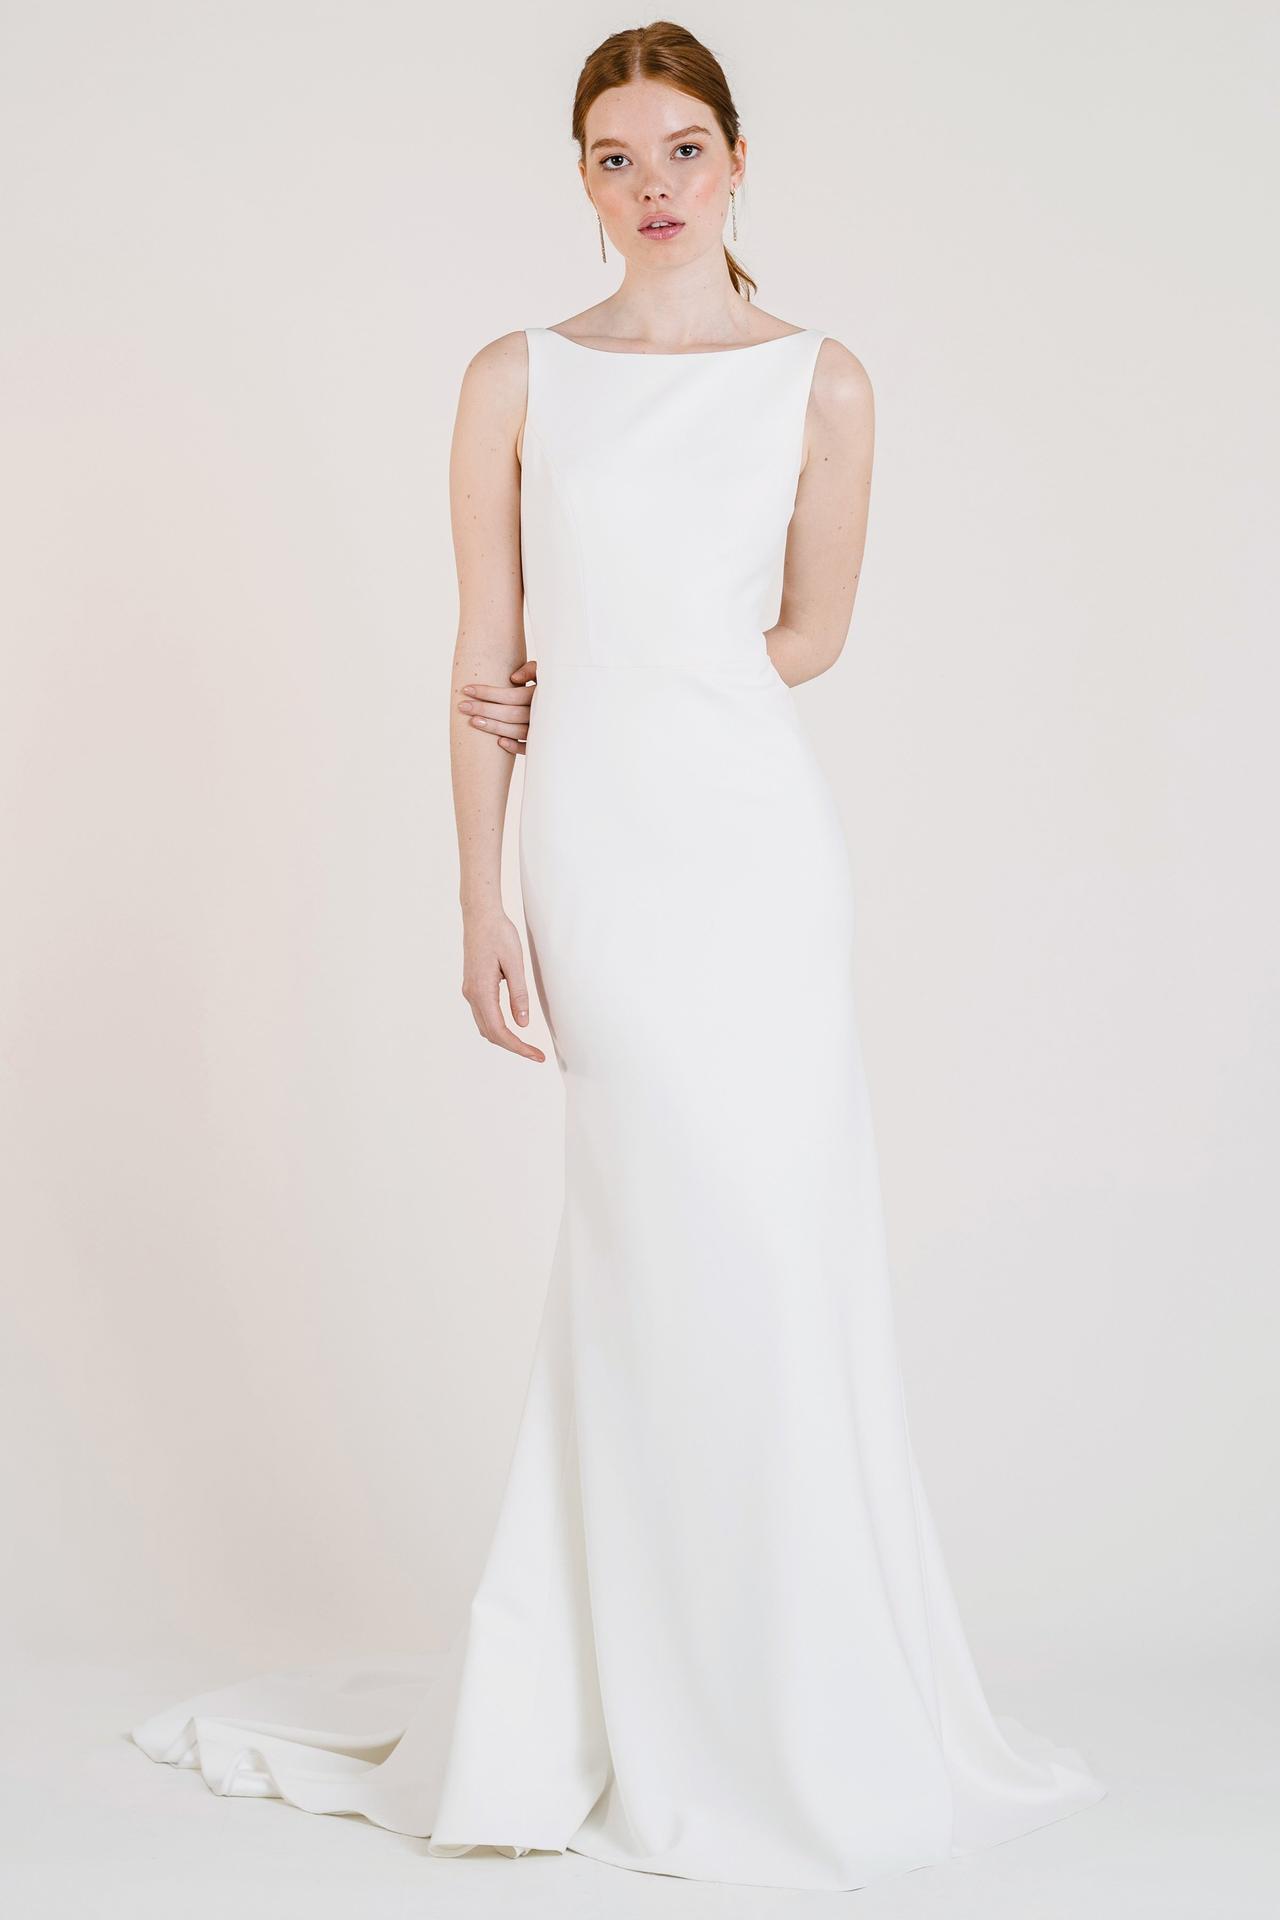 The 12 Wedding Dress Necklines You Need to Know